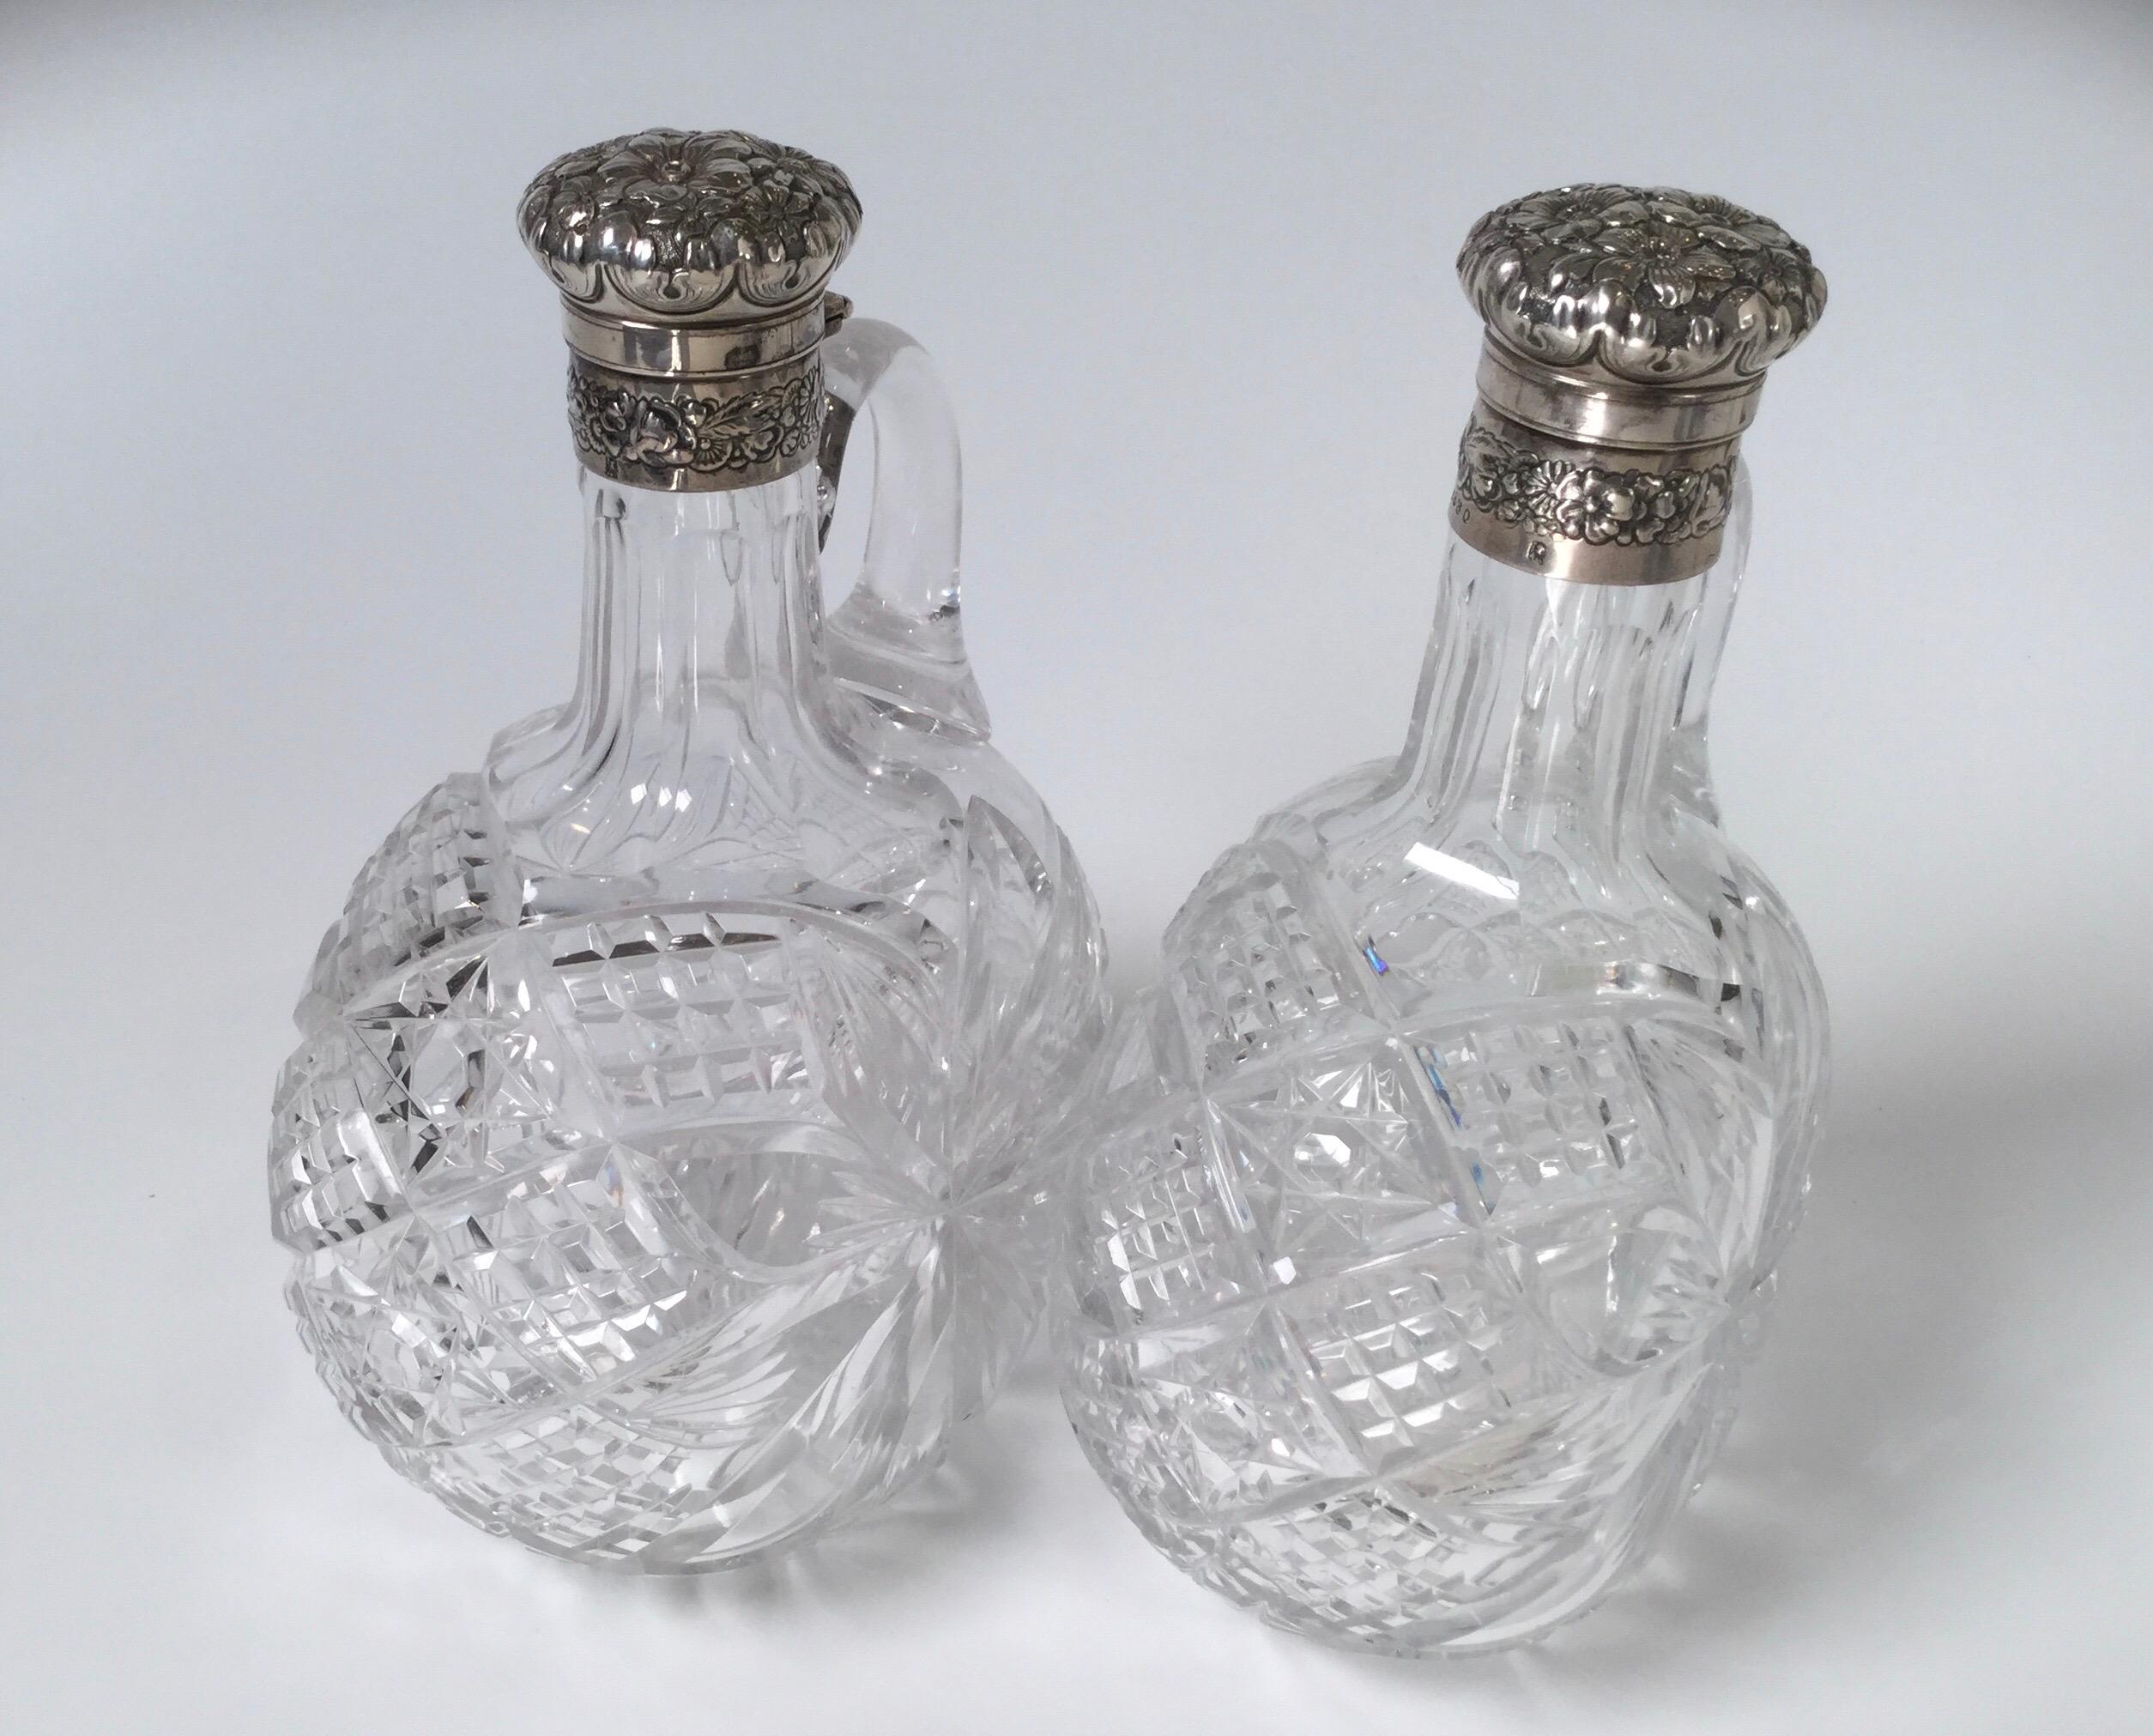 A pair of sterling mounted cut glass decanters with handles. The jug form with exceptional cutting in American brilliant glass attributed to Hawkes. The Gorham hallmarked sterling repousse lids which lock and unlock by turning the caps.